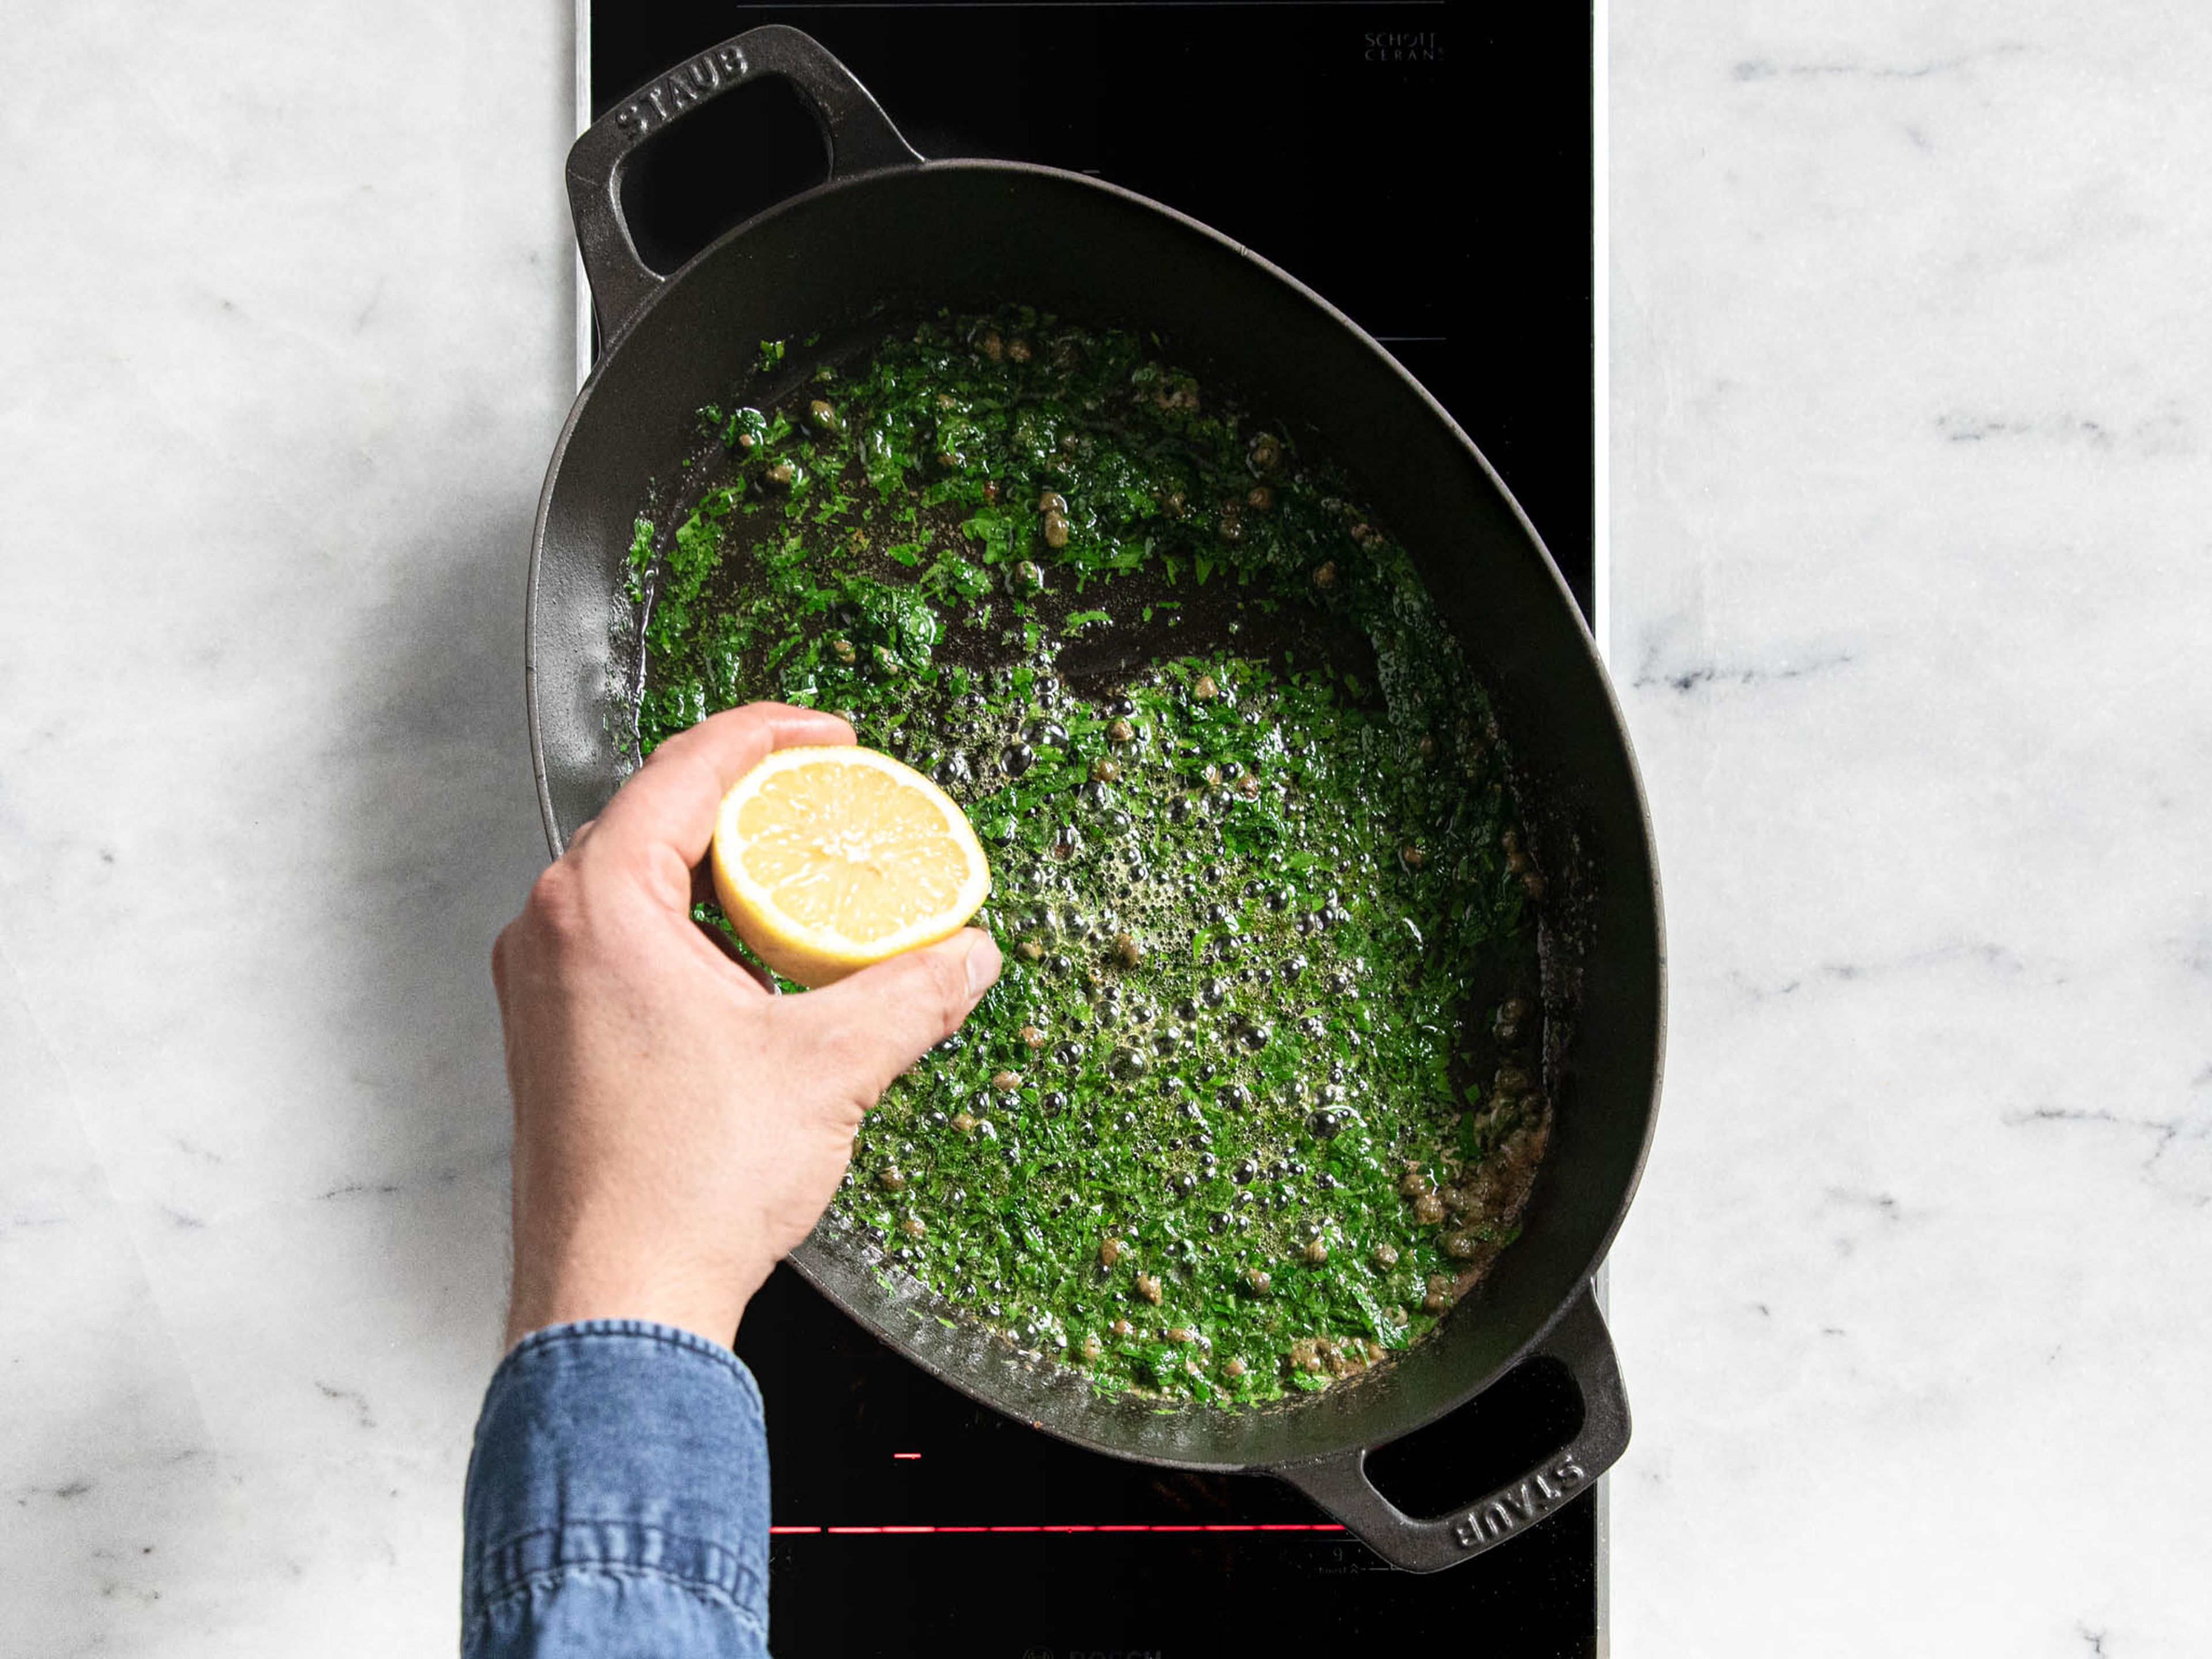 Finely chop parsley. In the same pan, heat butter until browned. Remove from heat. Toss in capers and parsley, juice lemon into pan, mix, and serve with the fish. Season with salt and pepper to taste. Enjoy!